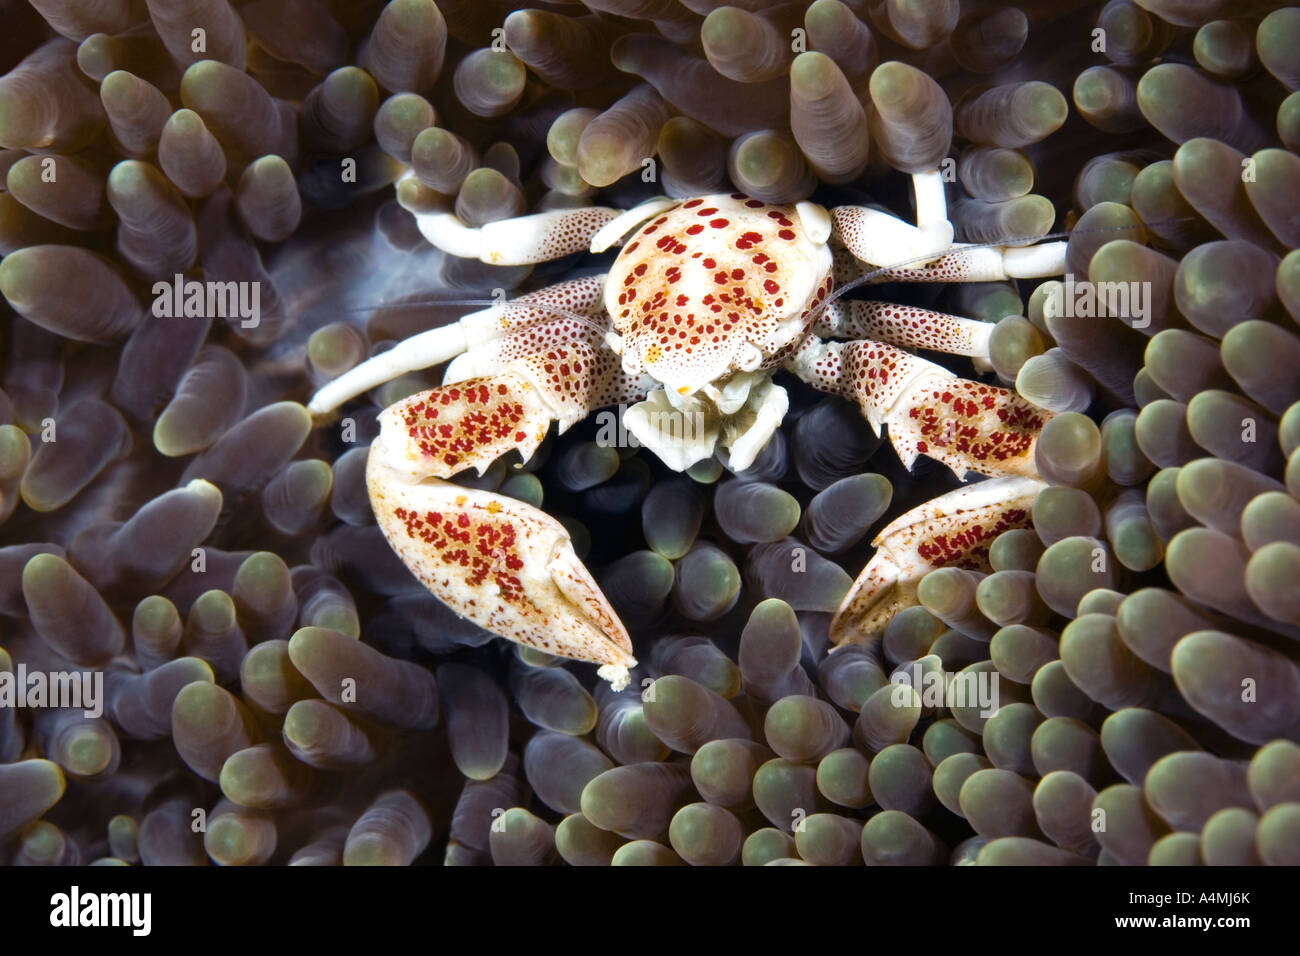 Porcelain Crab, Neopetrolisthes maculatus, living in a Sea Anemone. Also known as Neopetrolisthes ohshimai and Neopetrolisthes maculata Stock Photo